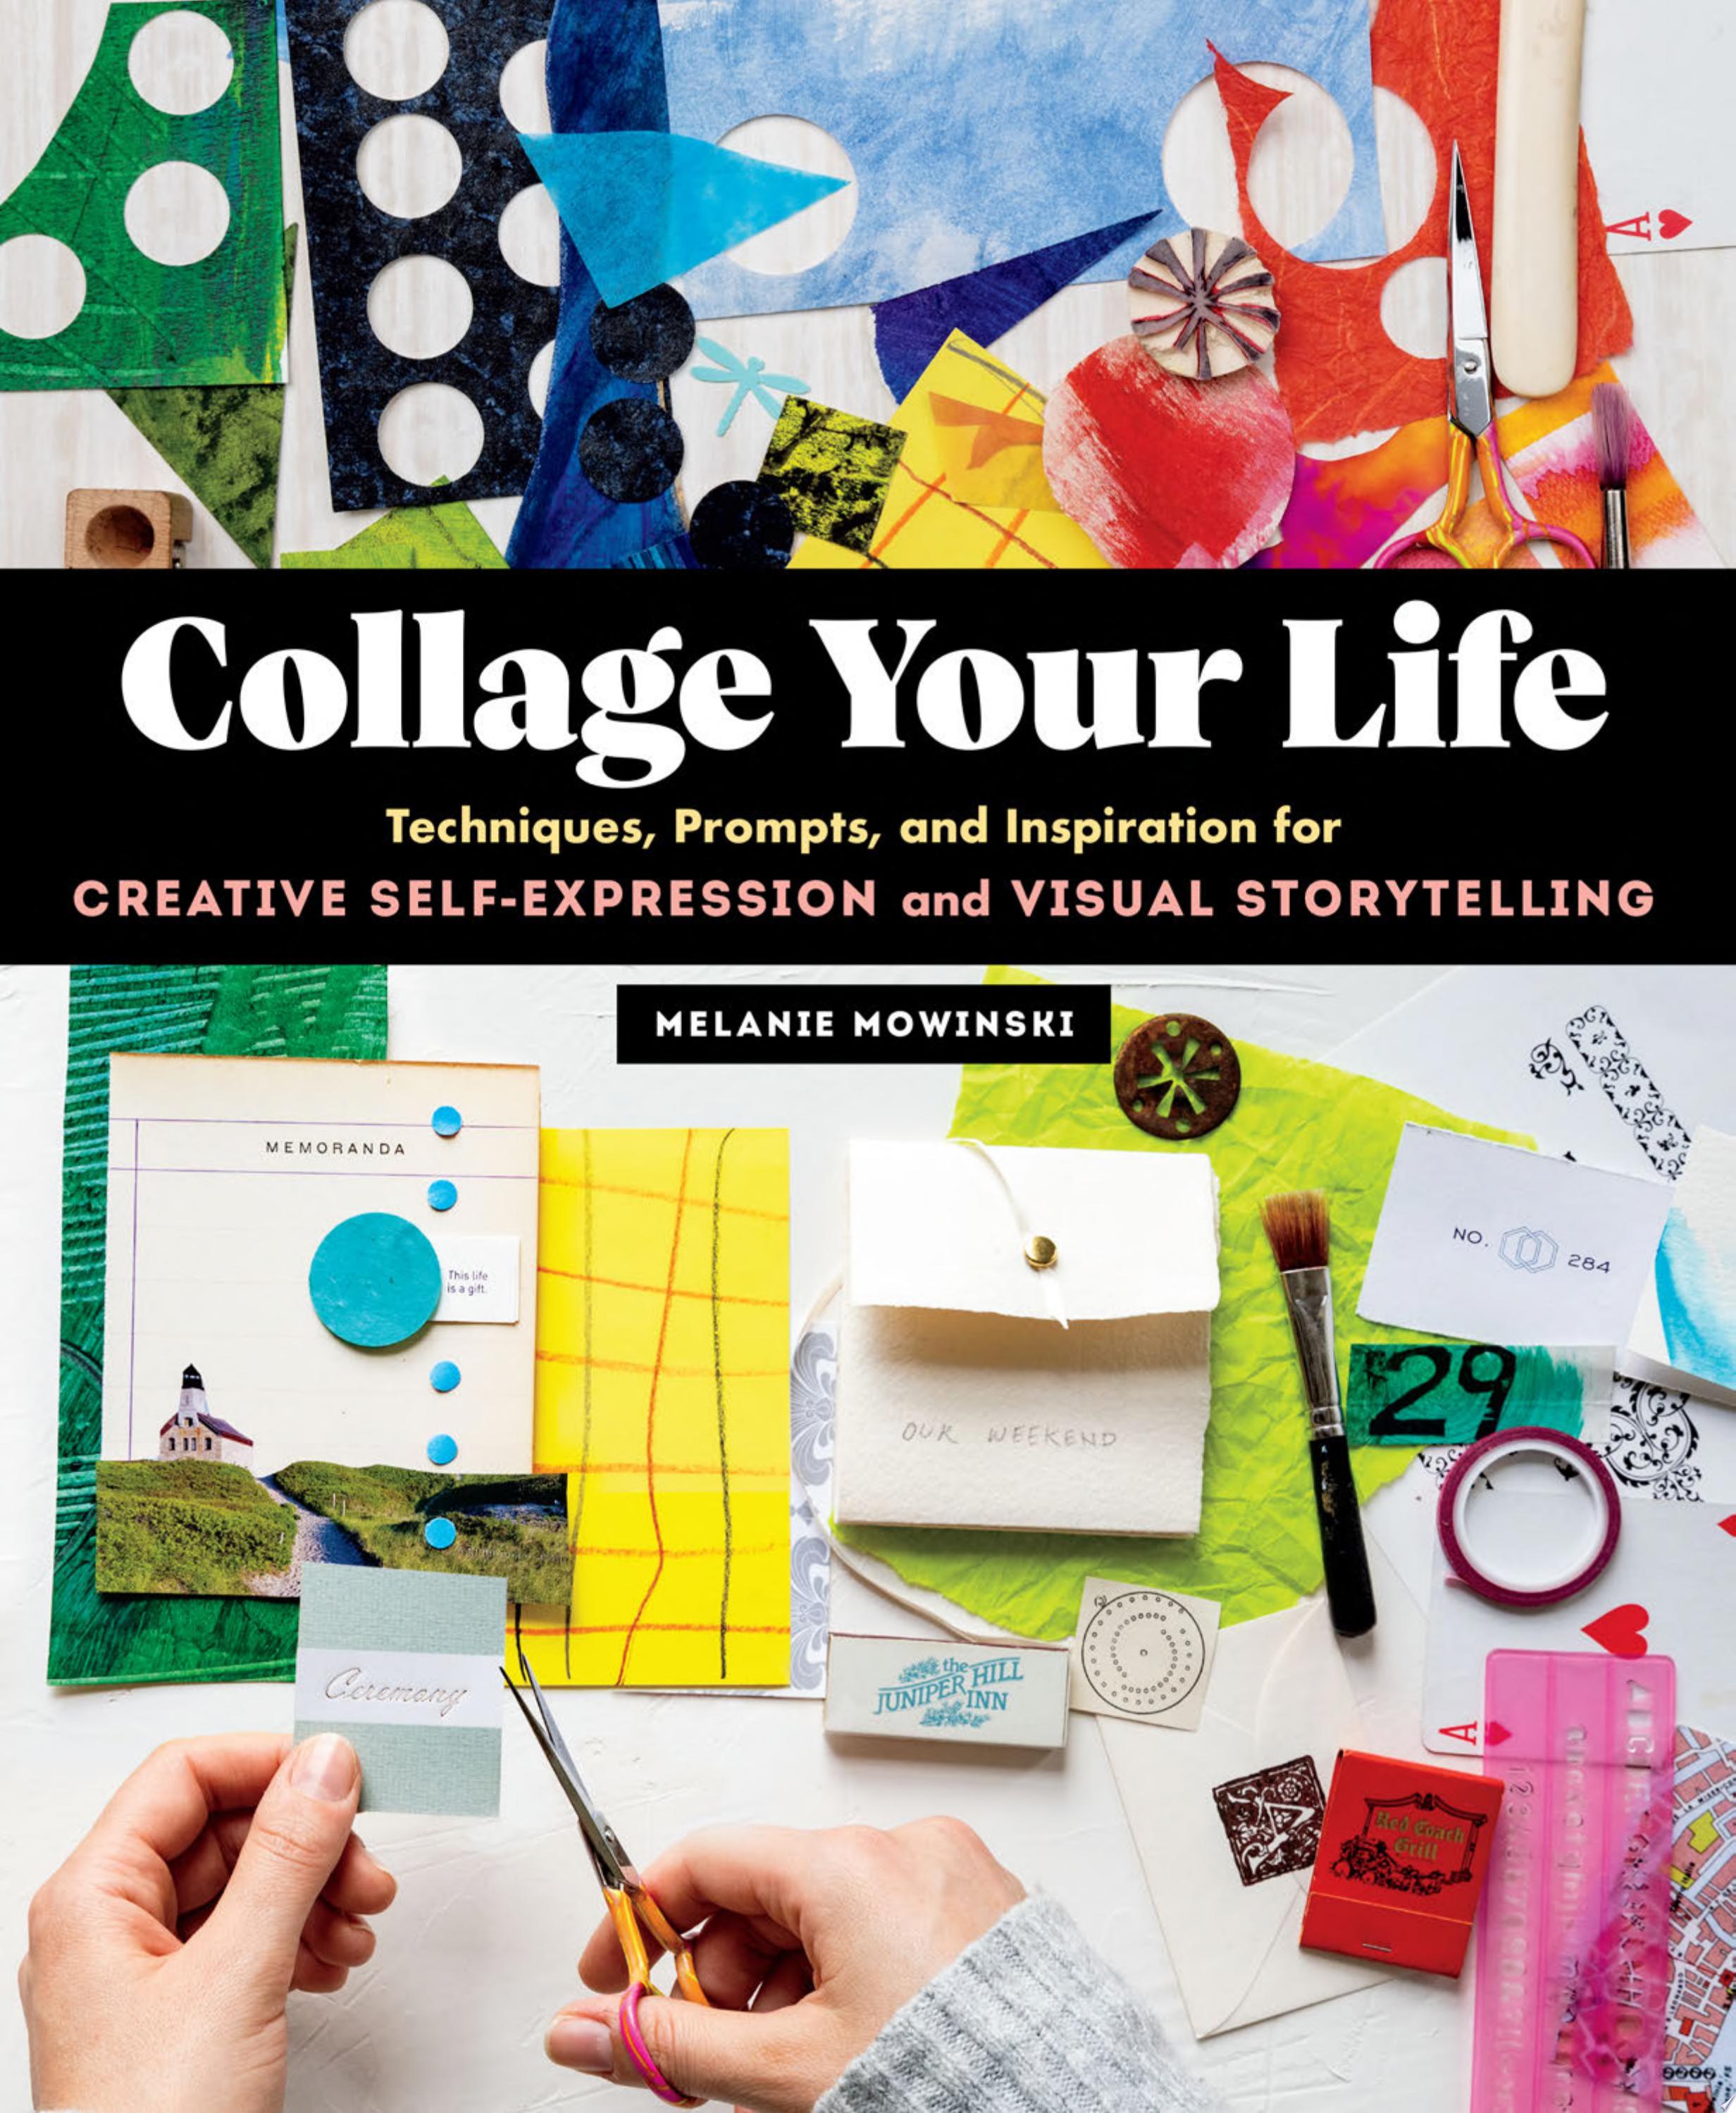 Image for "Collage Your Life"